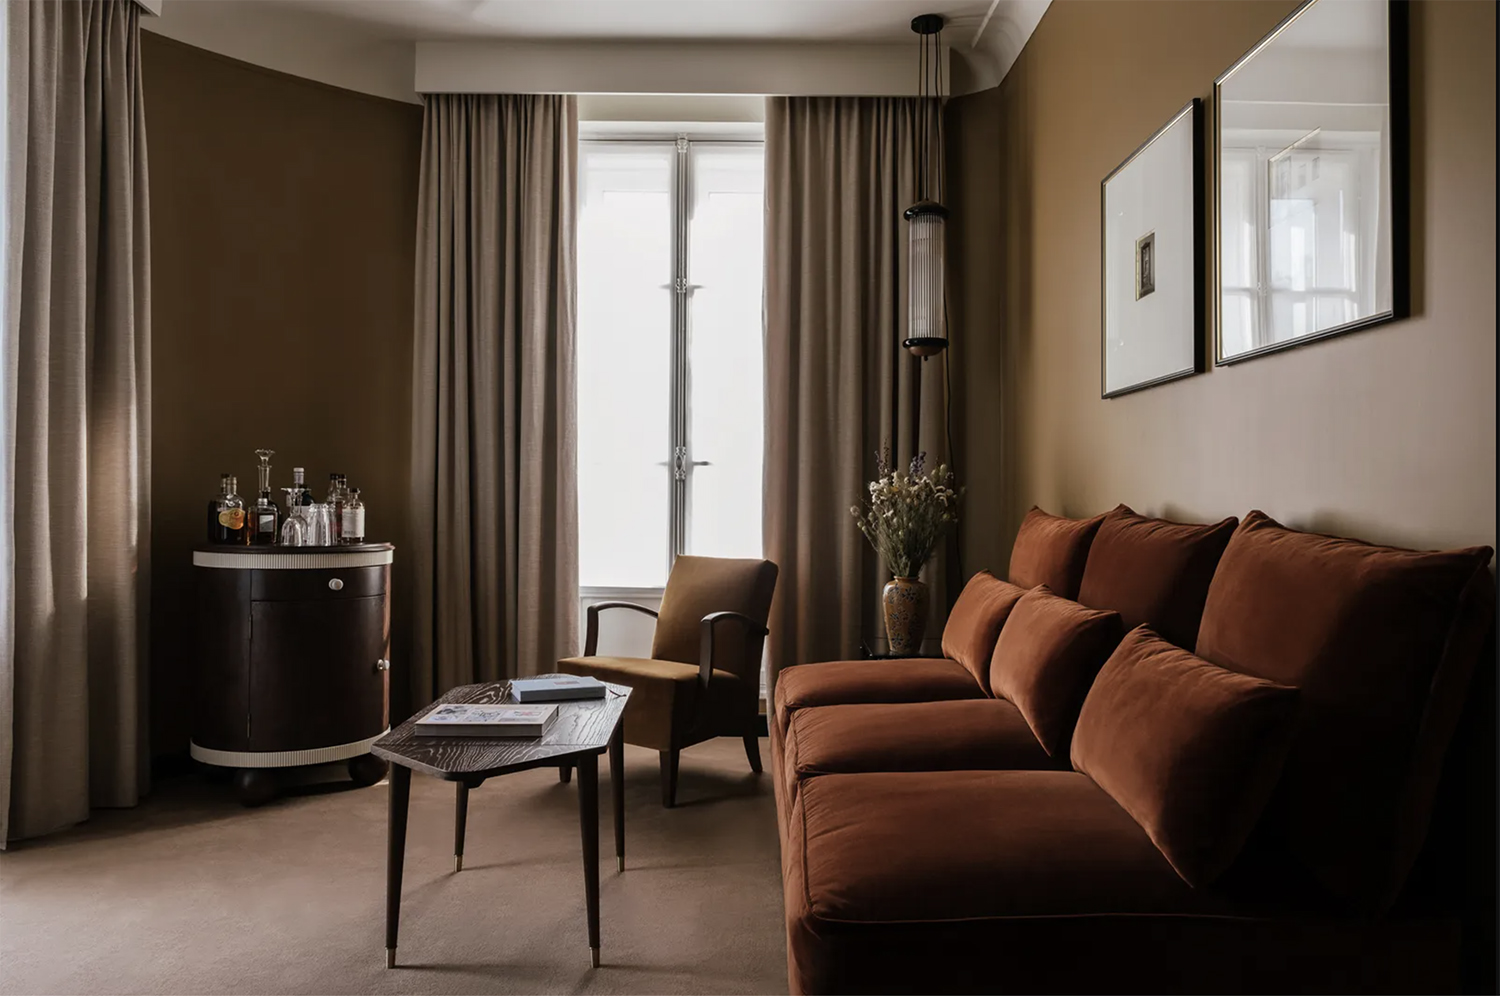 Refined masculine interiors of Hotel Rochechouart in Paris with an amber velvet sofa, a marigold velvet armchair and a mahogany coffee table